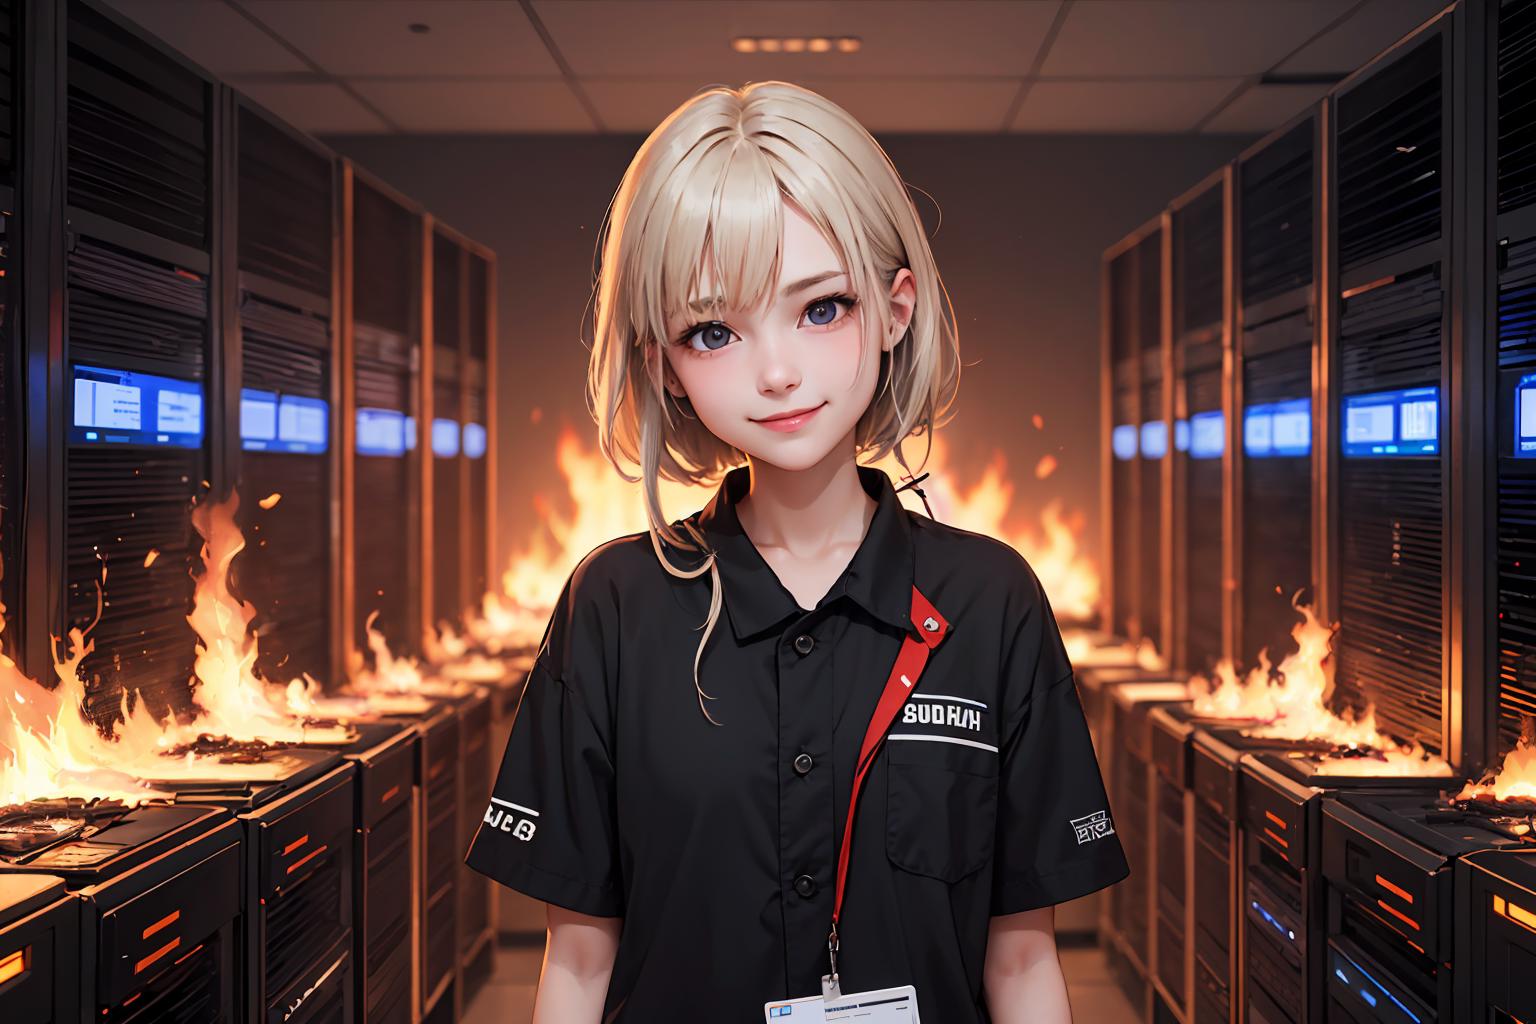 A woman in a black shirt with a Subaru logo on it is standing in front of a wall of fire.